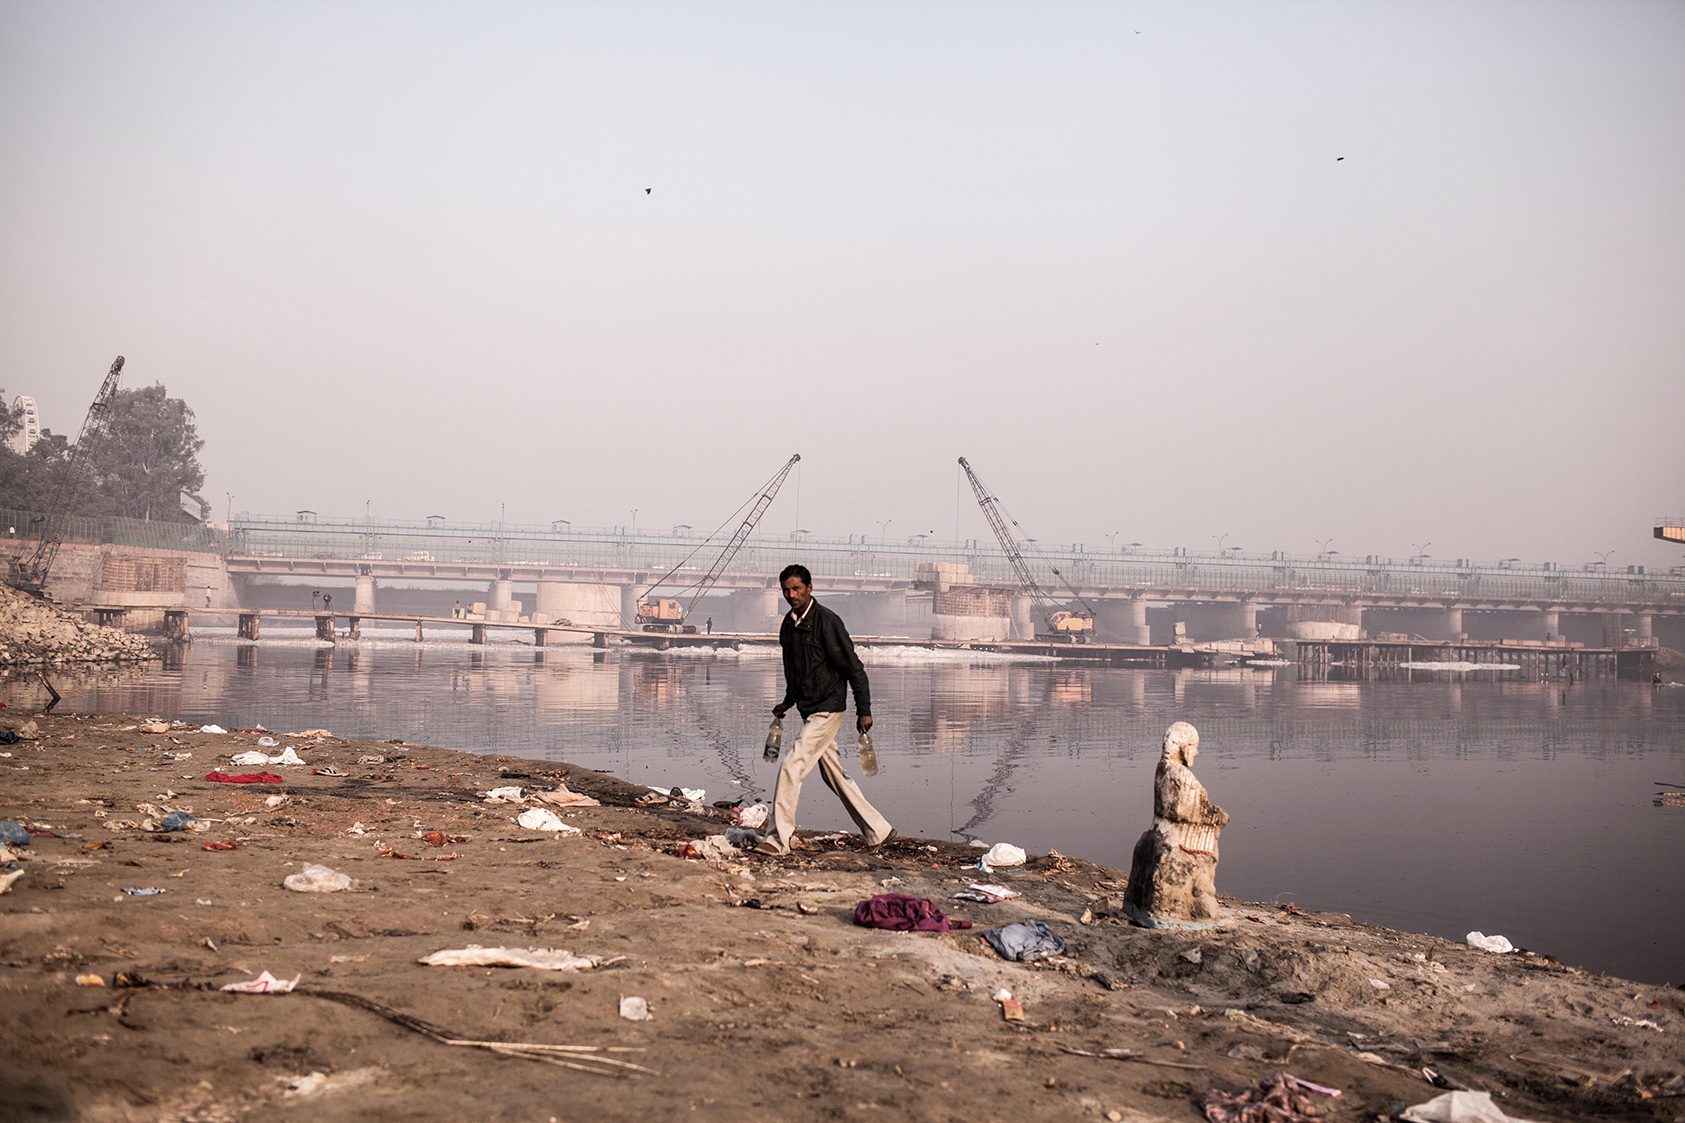 A man filled two bottles of water from Yamuna River, which he believes very sacred